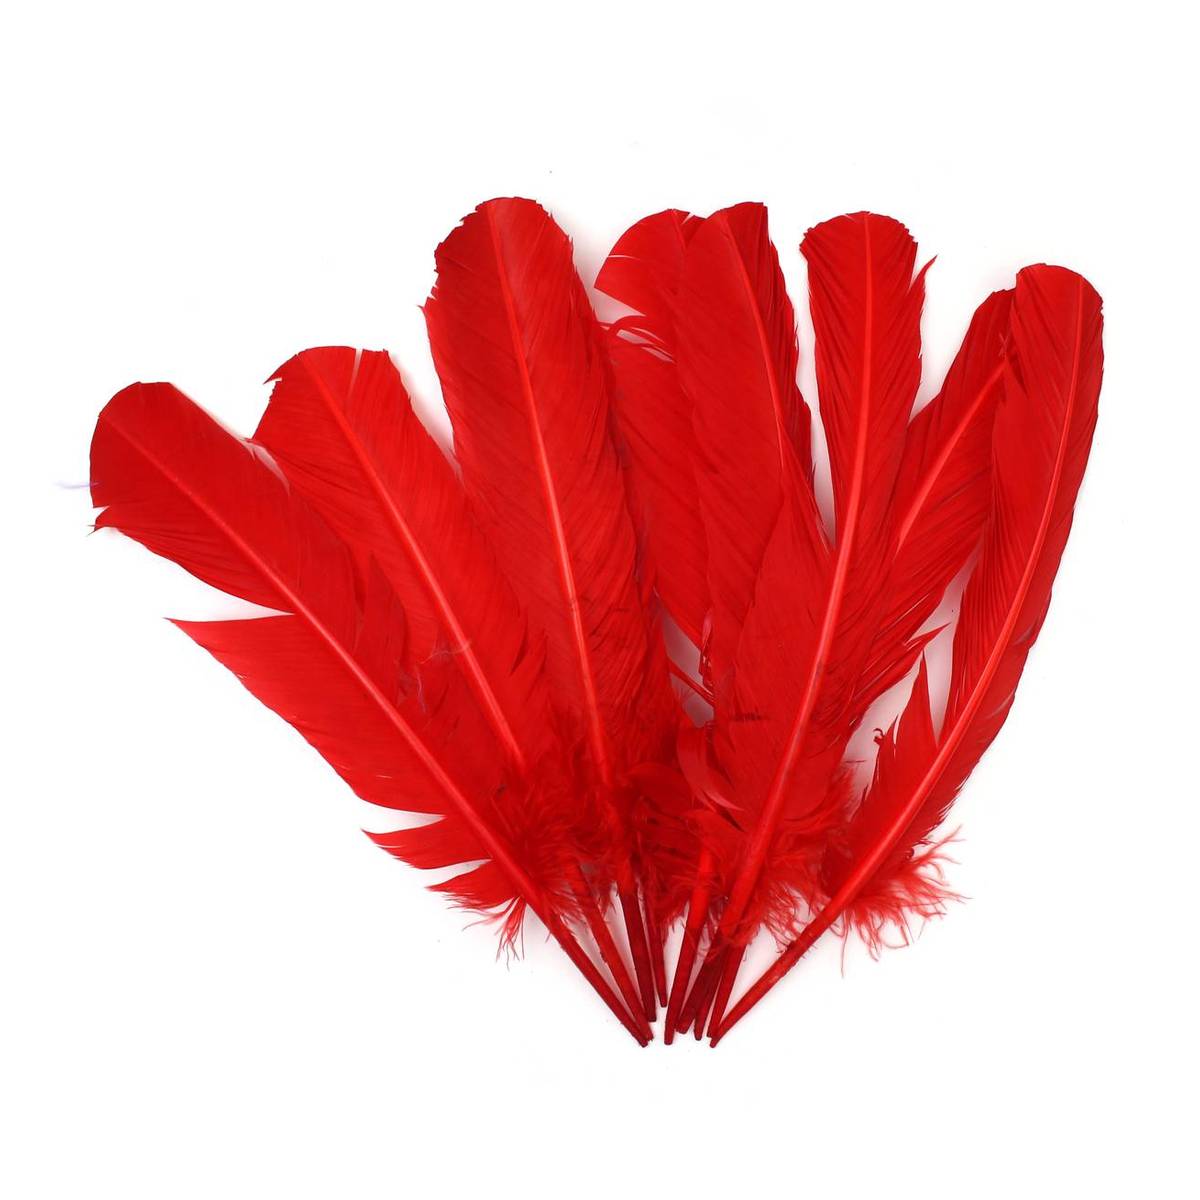 https://www.hobbycraft.co.uk/on/demandware.static/-/Sites-hobbycraft-uk-master/default/dw4c767f8c/images/large/570389_1005_1_-red-american-style-feathers-9-pack.jpg